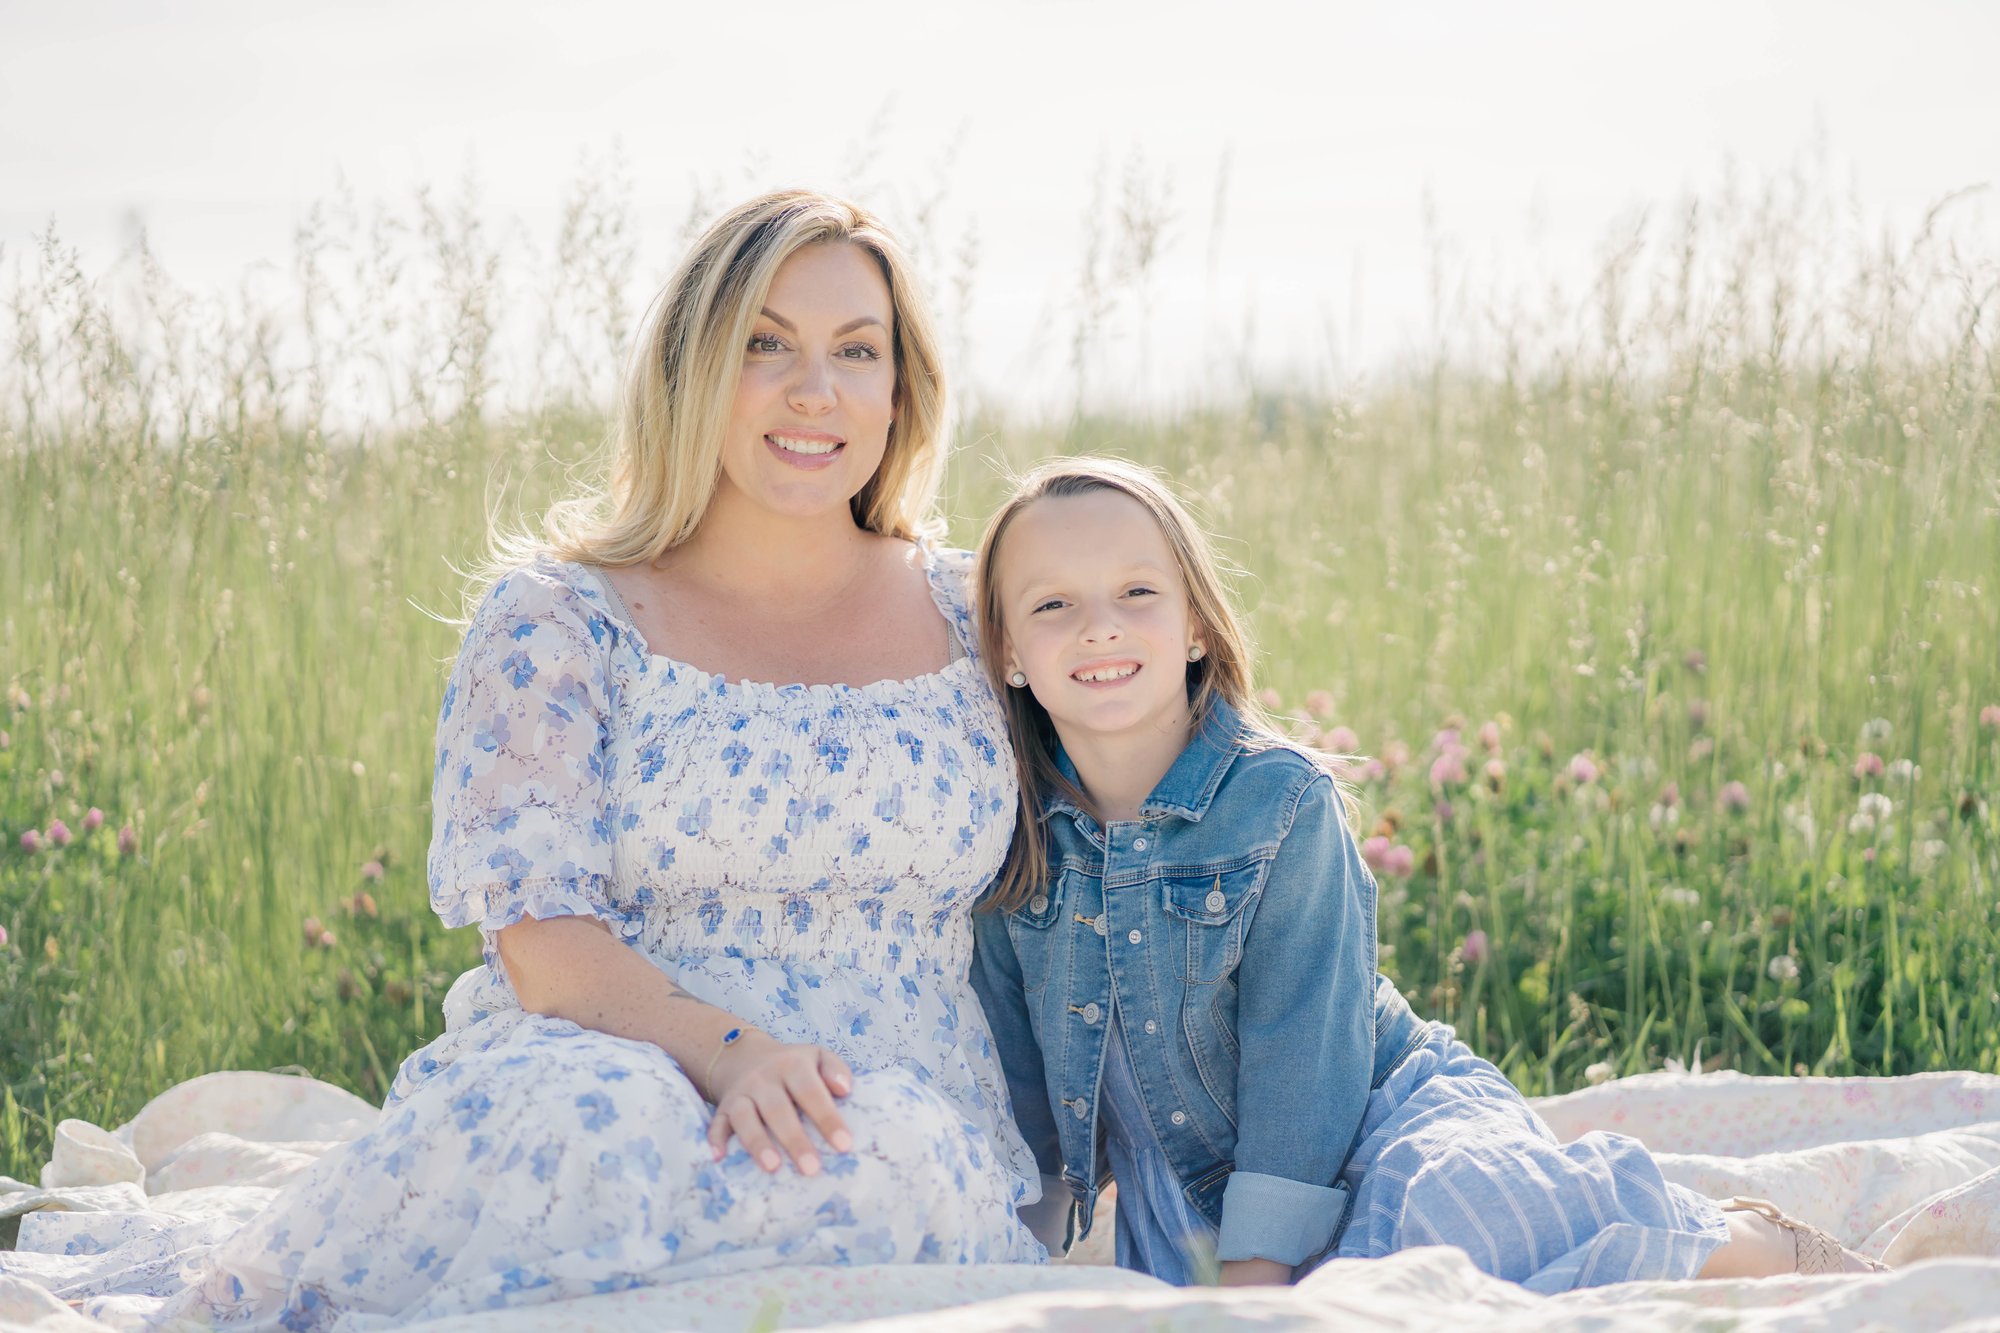 Mother and daughter photography by Stephanie Grooms Artistry